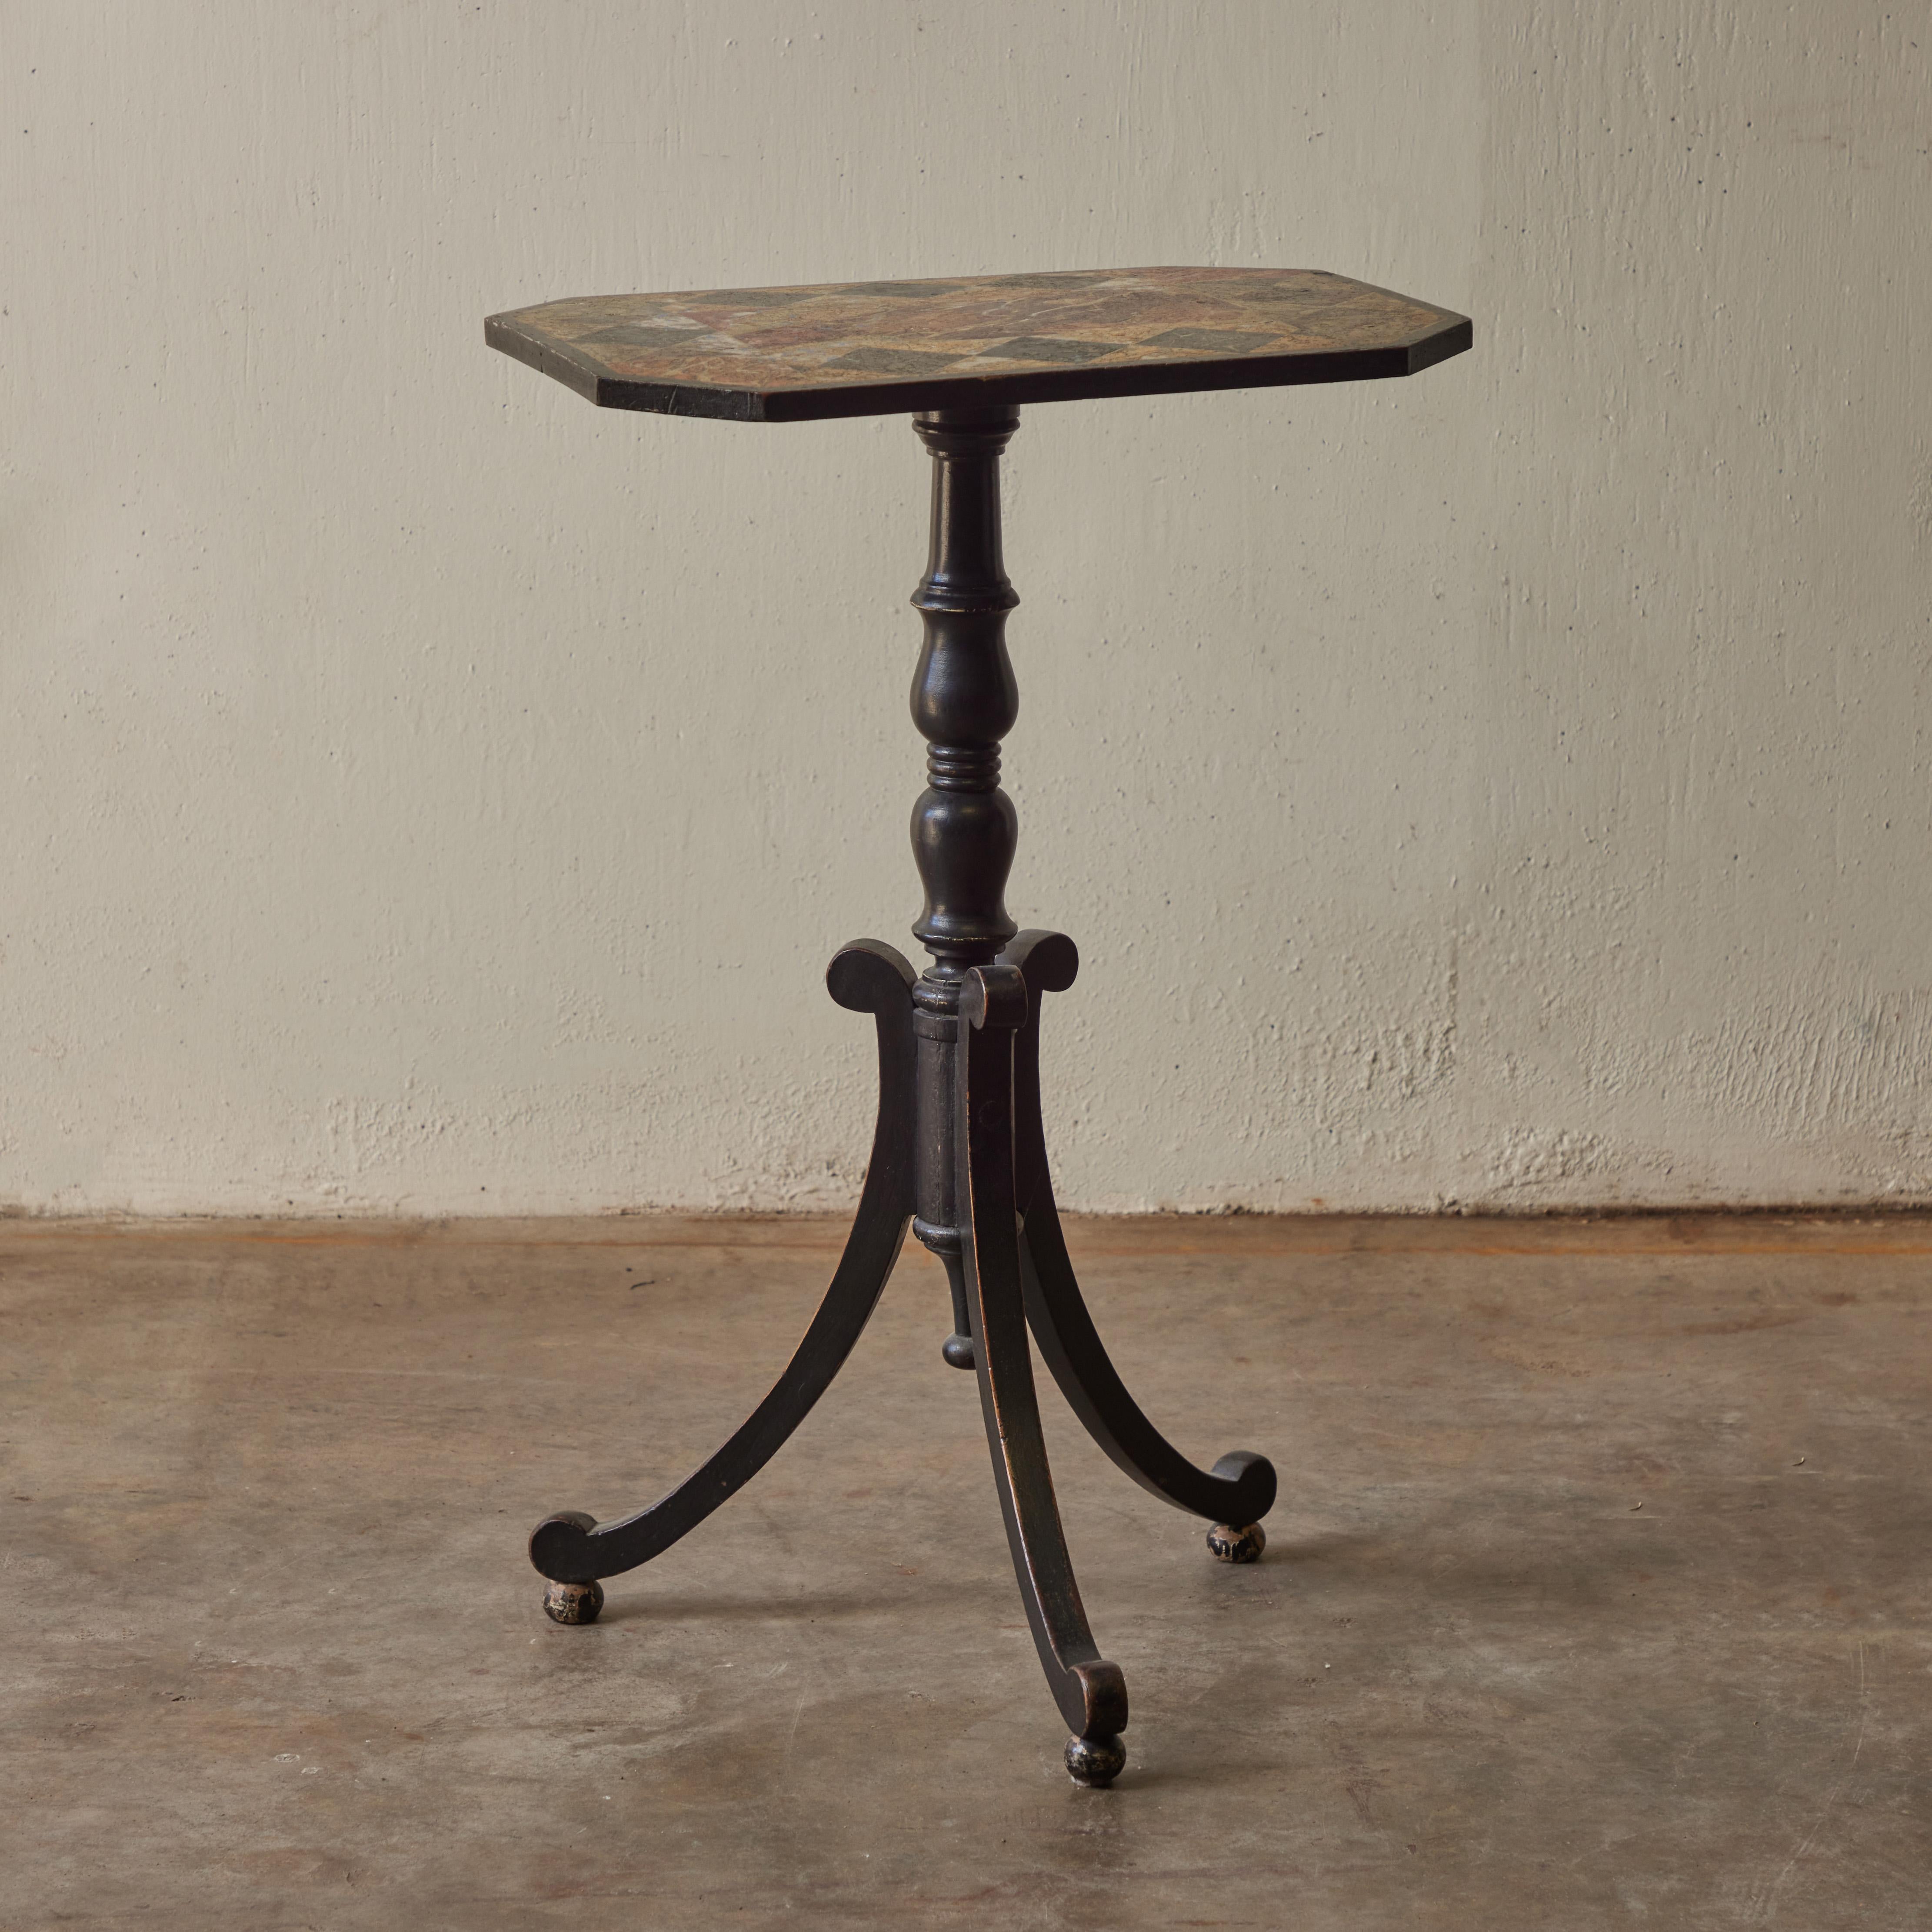 Early 19th Century English Regency Painted Trompe-l'Oeil Specimen Table For Sale